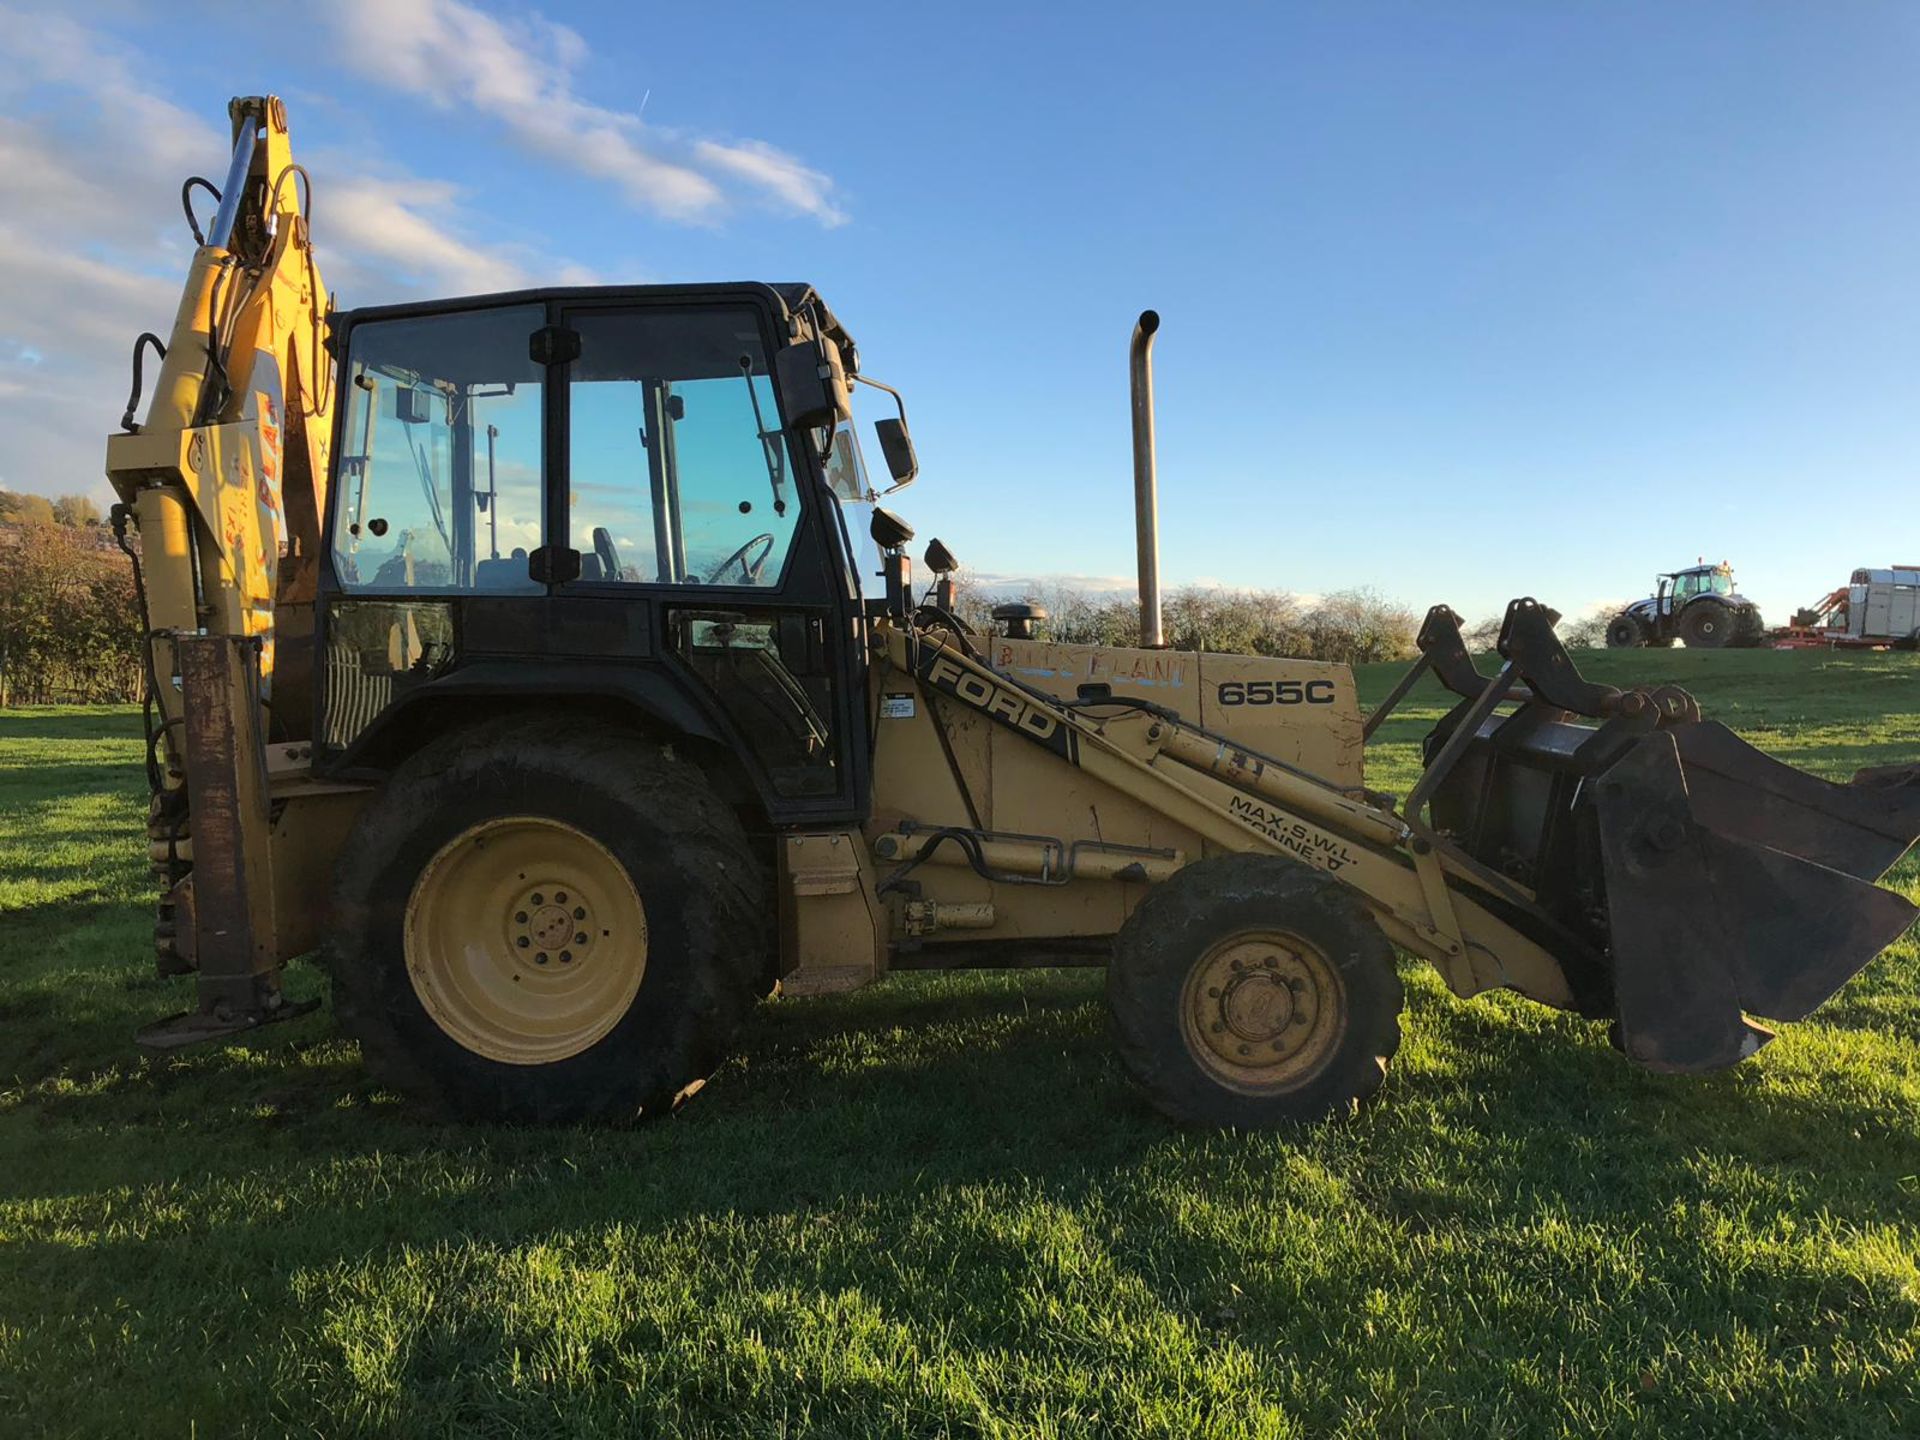 1989 FORD 655C YELLOW/BLACK BACKHOE LOADER TRACTOR, STARTS, RUNS, LIFTS & DIGS *PLUS VAT* - Image 3 of 19